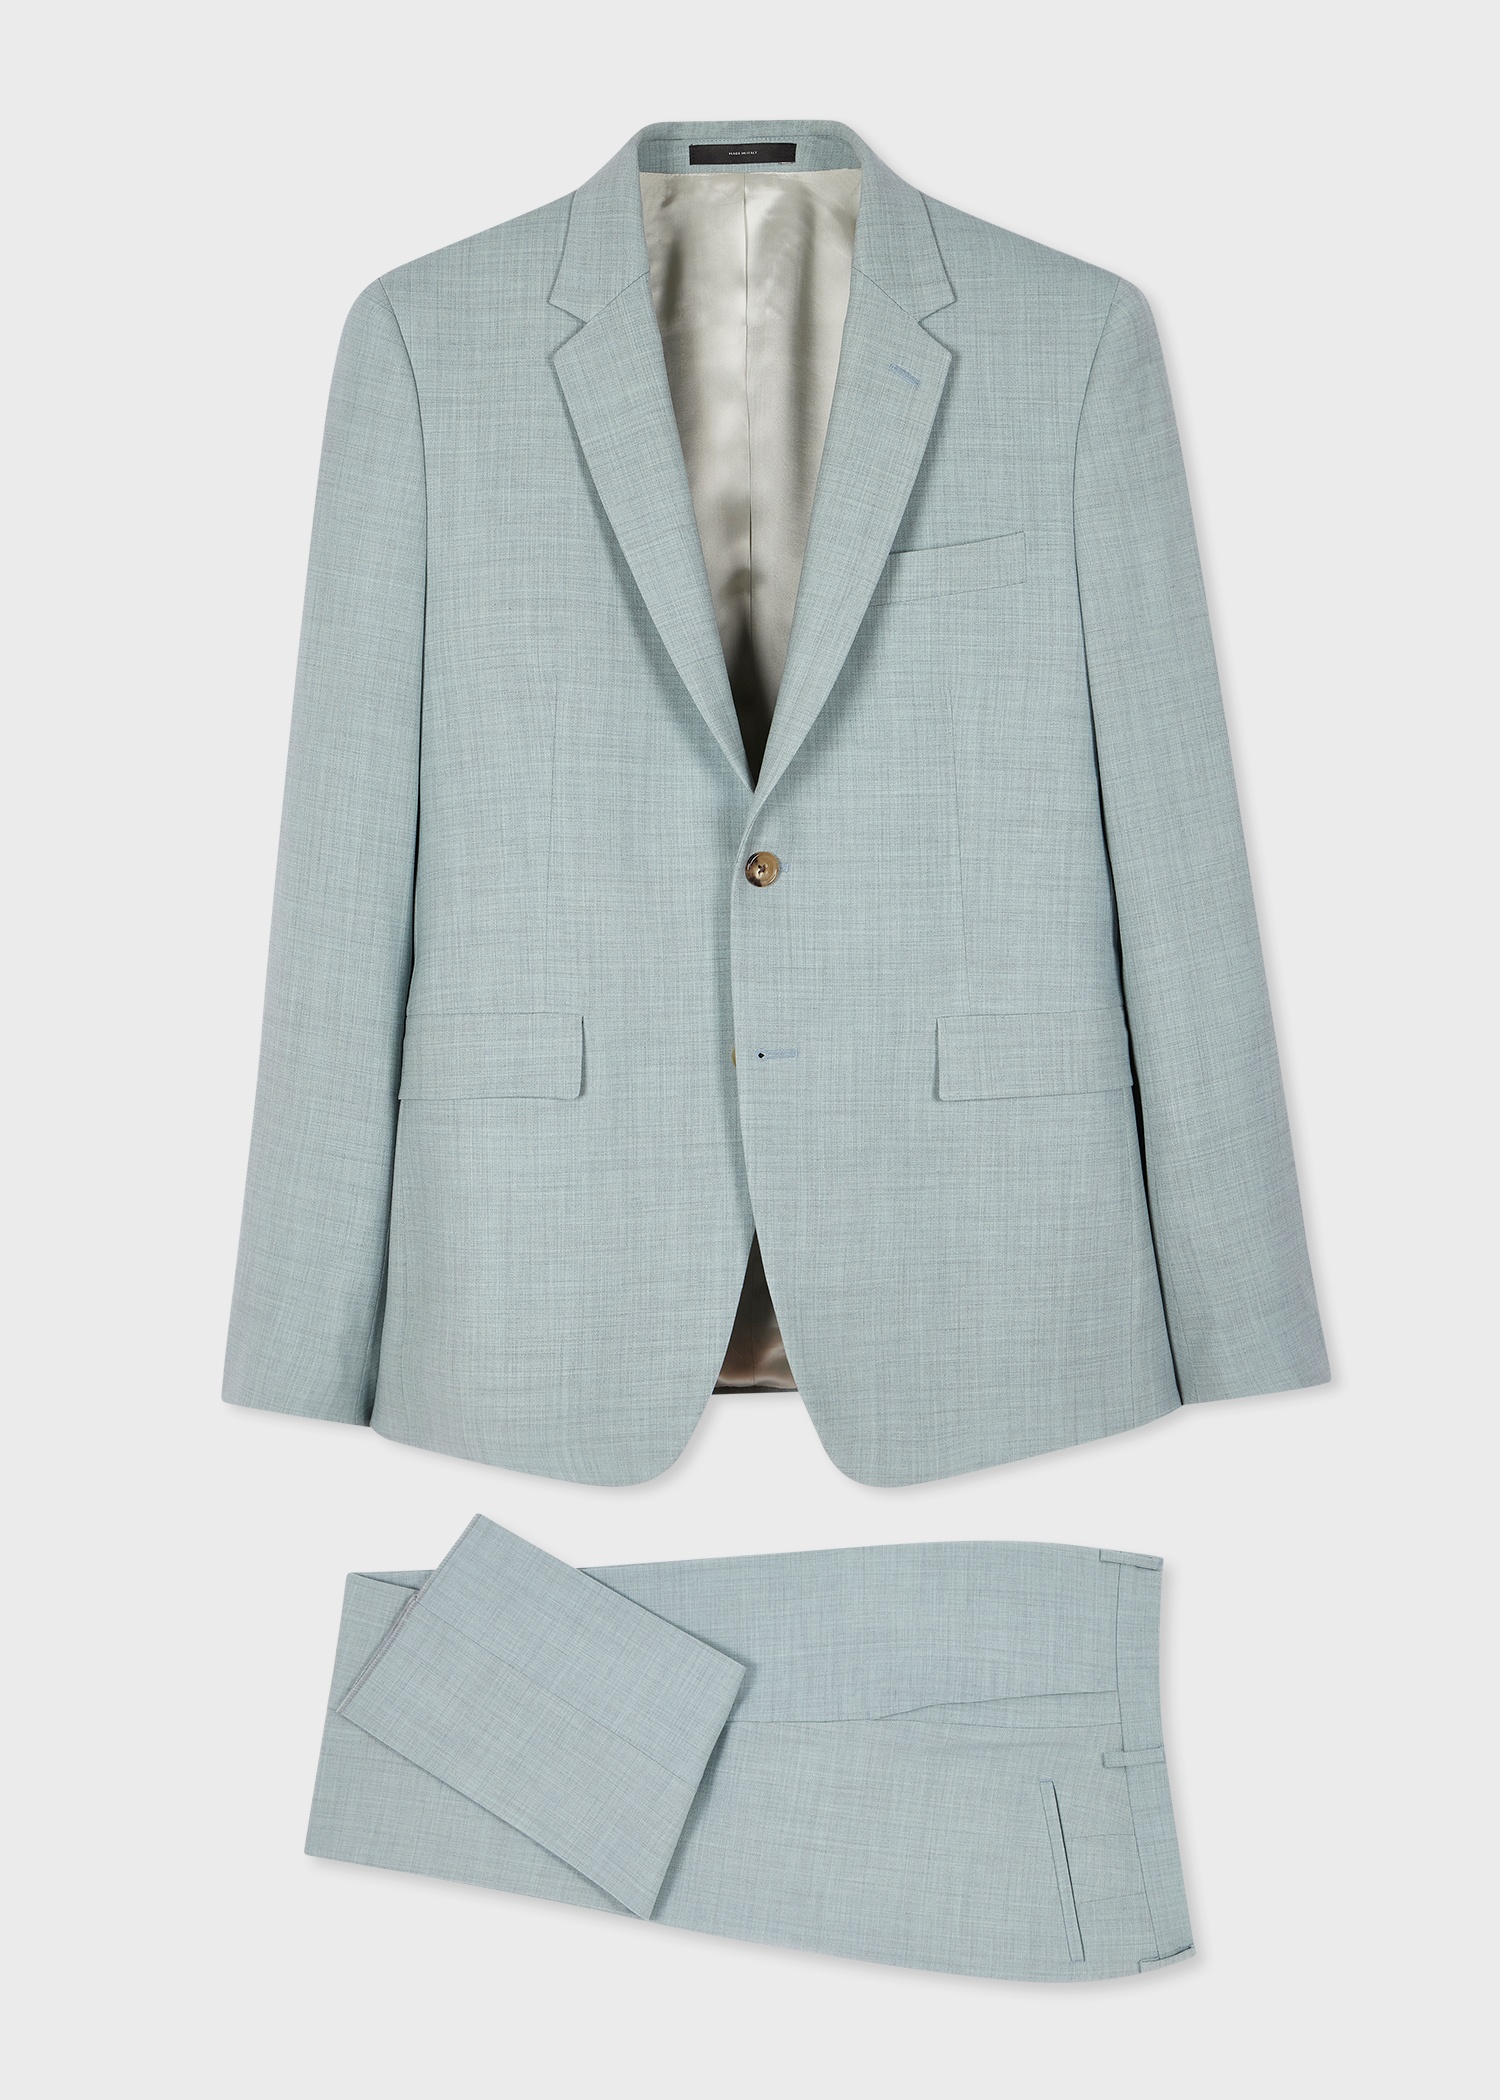 The Kensington - Light Blue Marl Overdyed Stretch-Wool Suit - 1